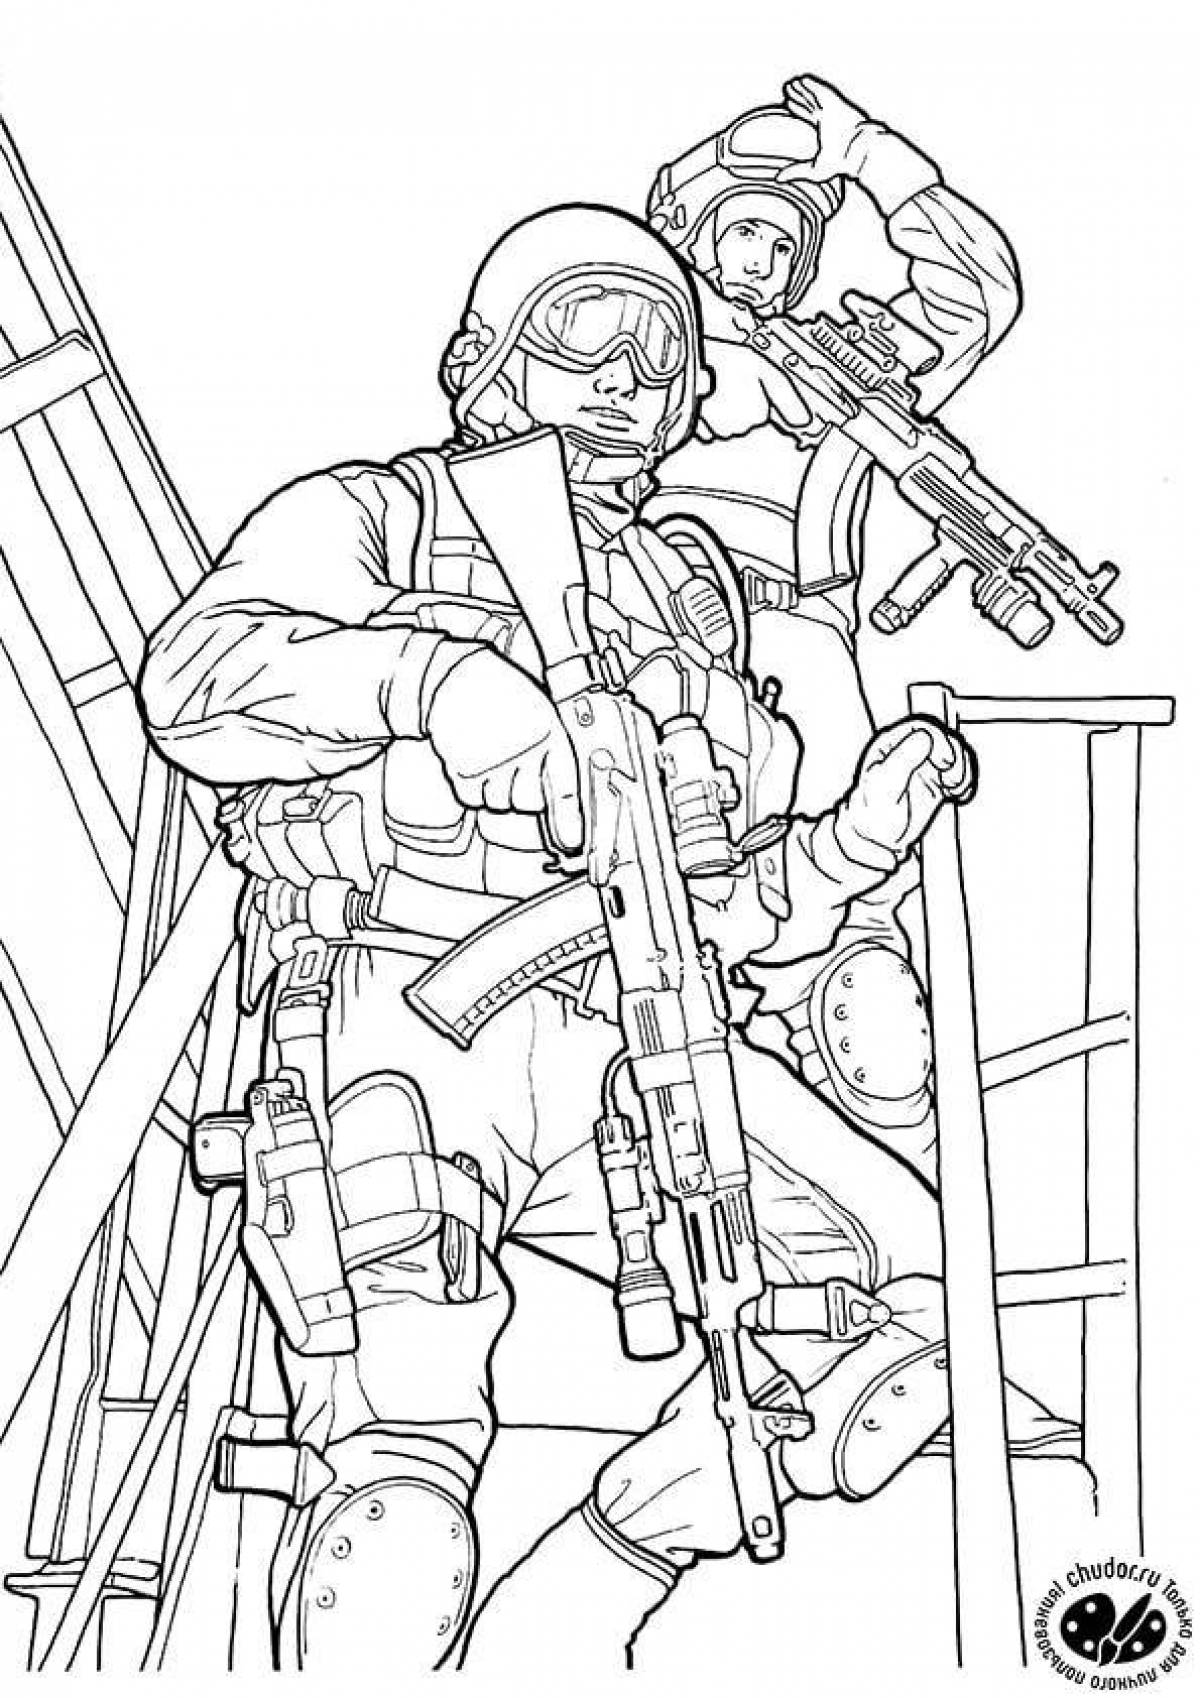 Adorable special forces coloring book for kids